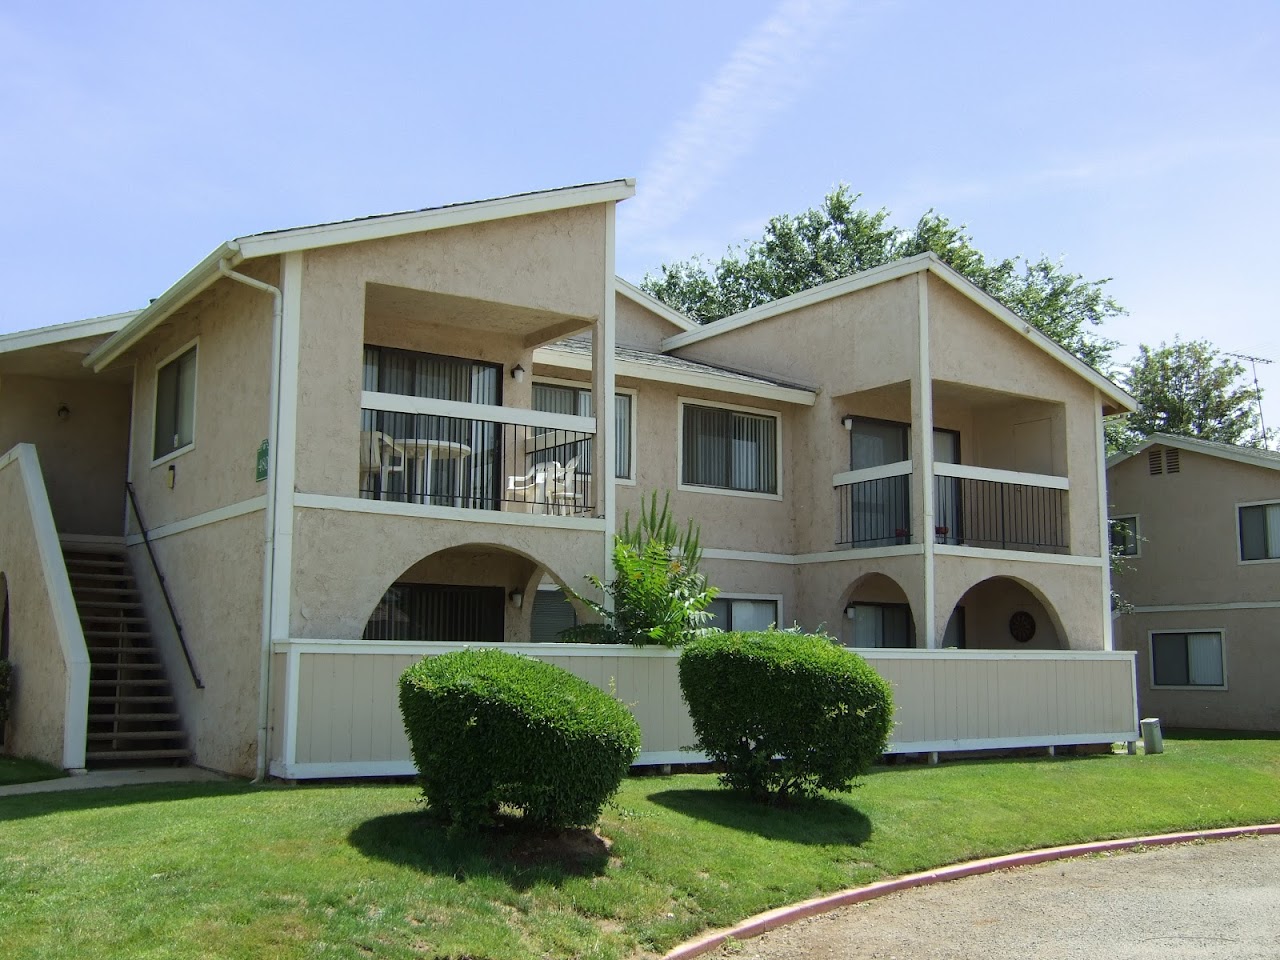 Photo of MOUNTAIN VIEW APTS. Affordable housing located at 488 E 15TH ST BEAUMONT, CA 92223